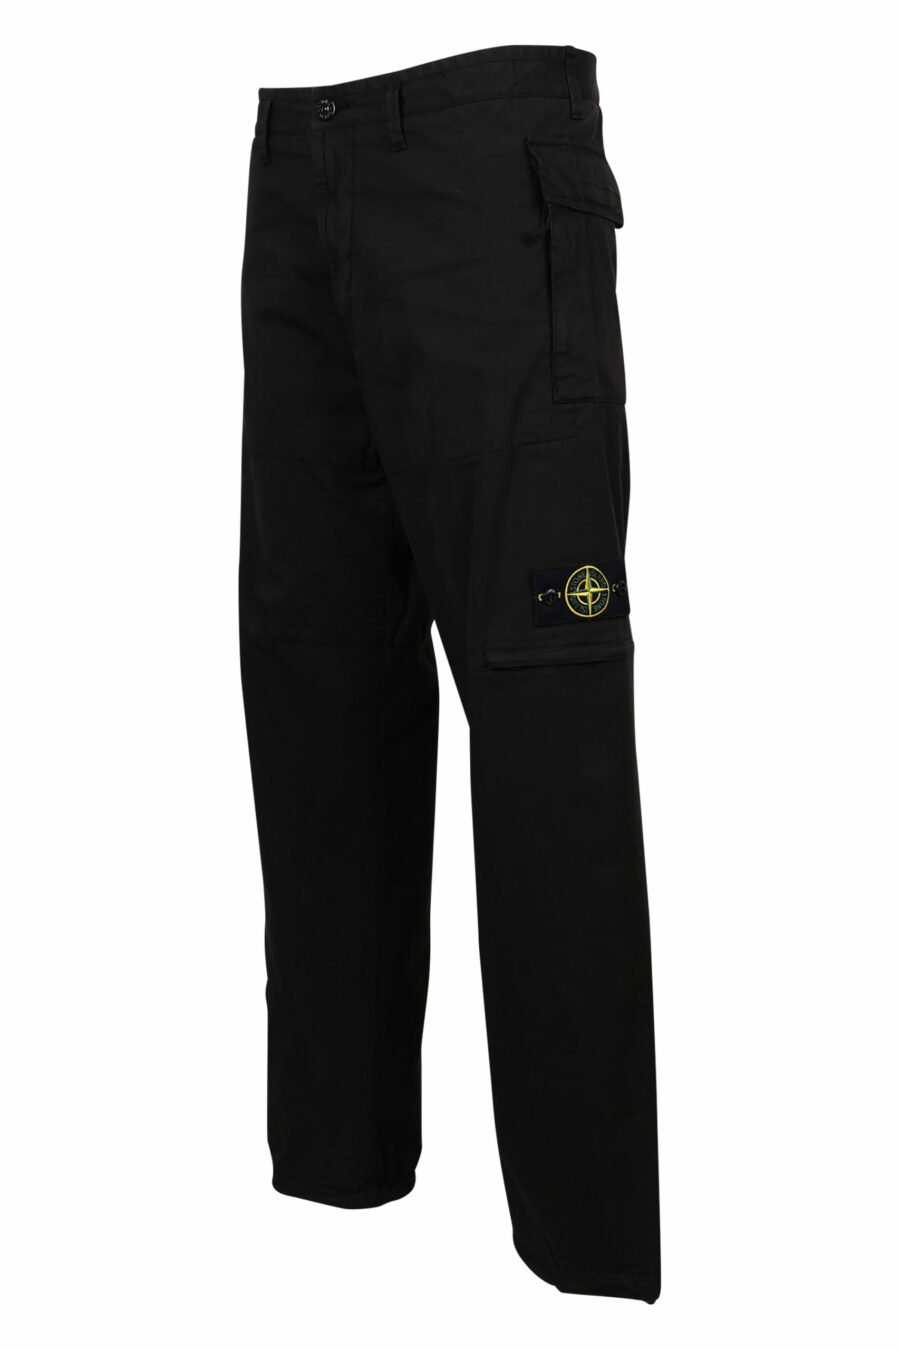 Black cargo trousers with pockets and logo patch - 8052572731846 1 scaled